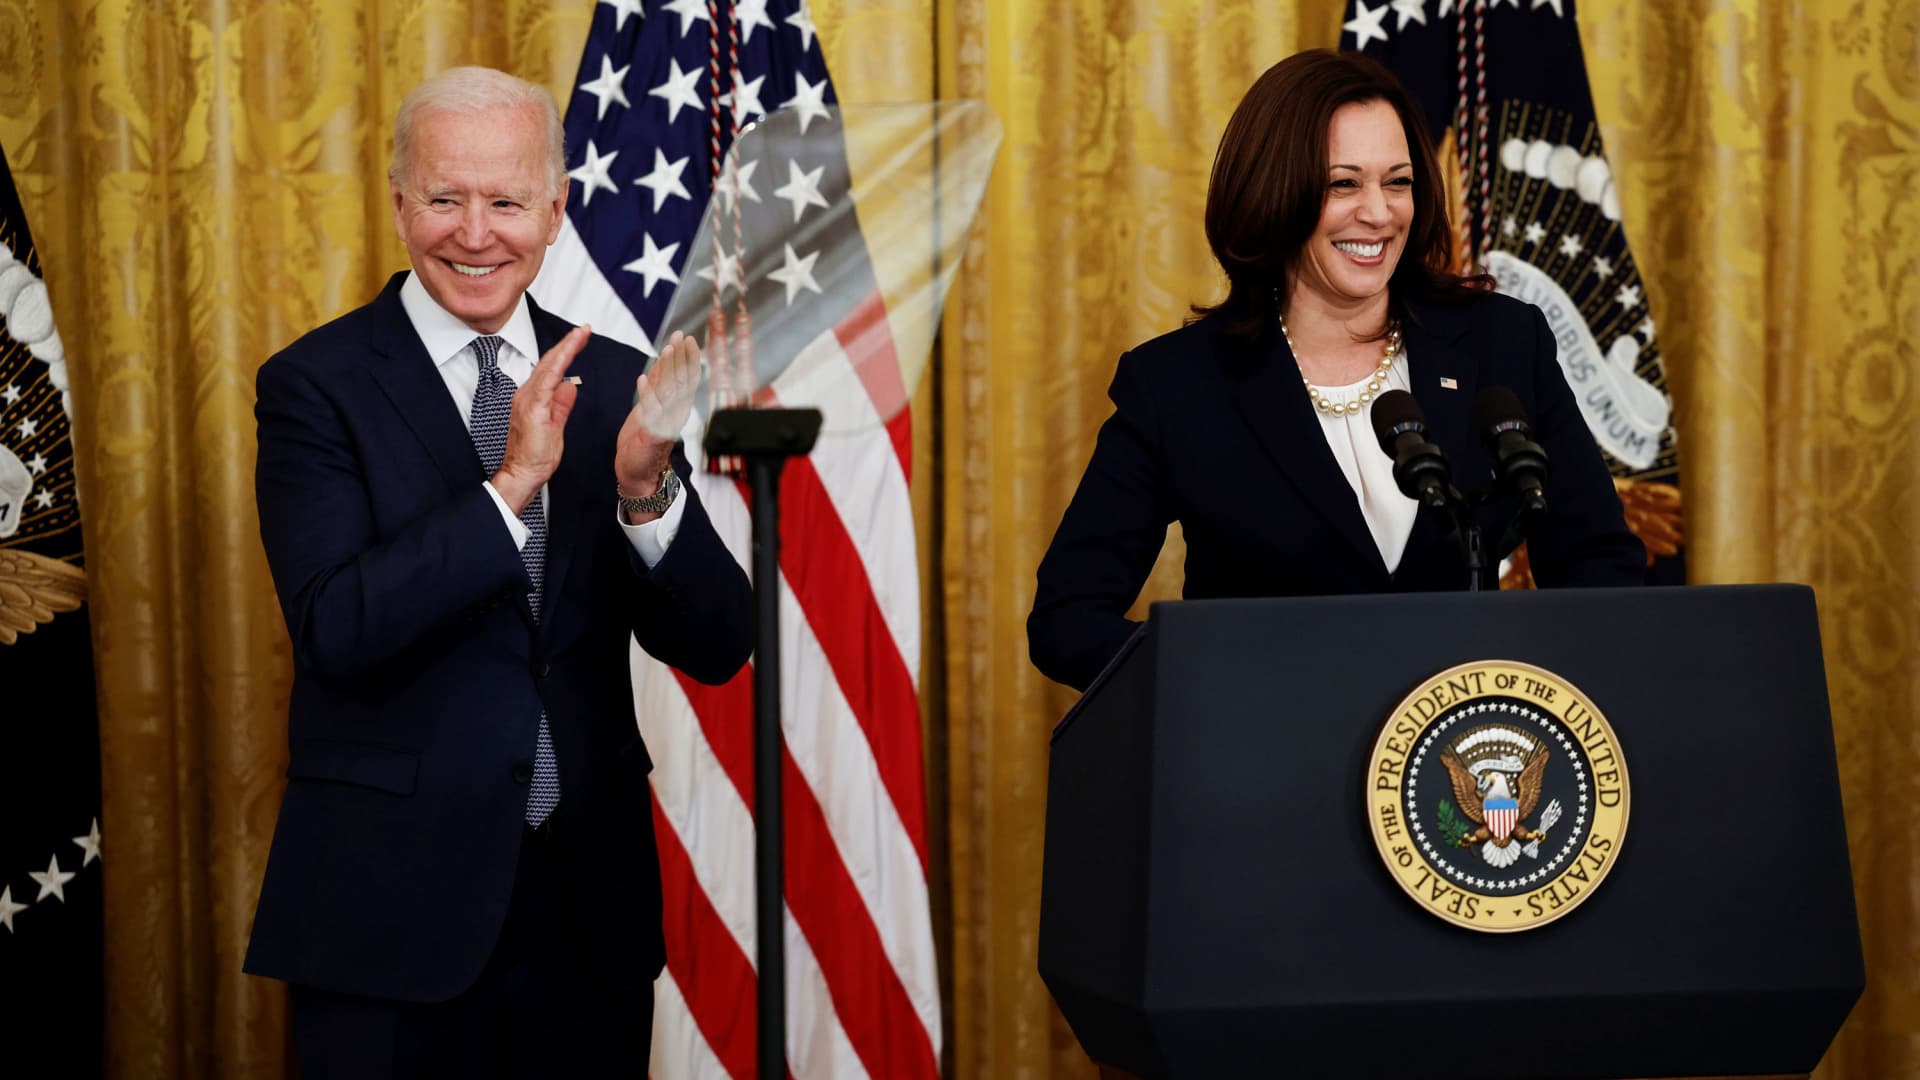 U.S. President Joe Biden applauds Vice President Kamala Harris as they arrive to marking the signing of the Juneteenth National Independence Day Act into law in the East Room of the White House in Washington, June 17, 2021.